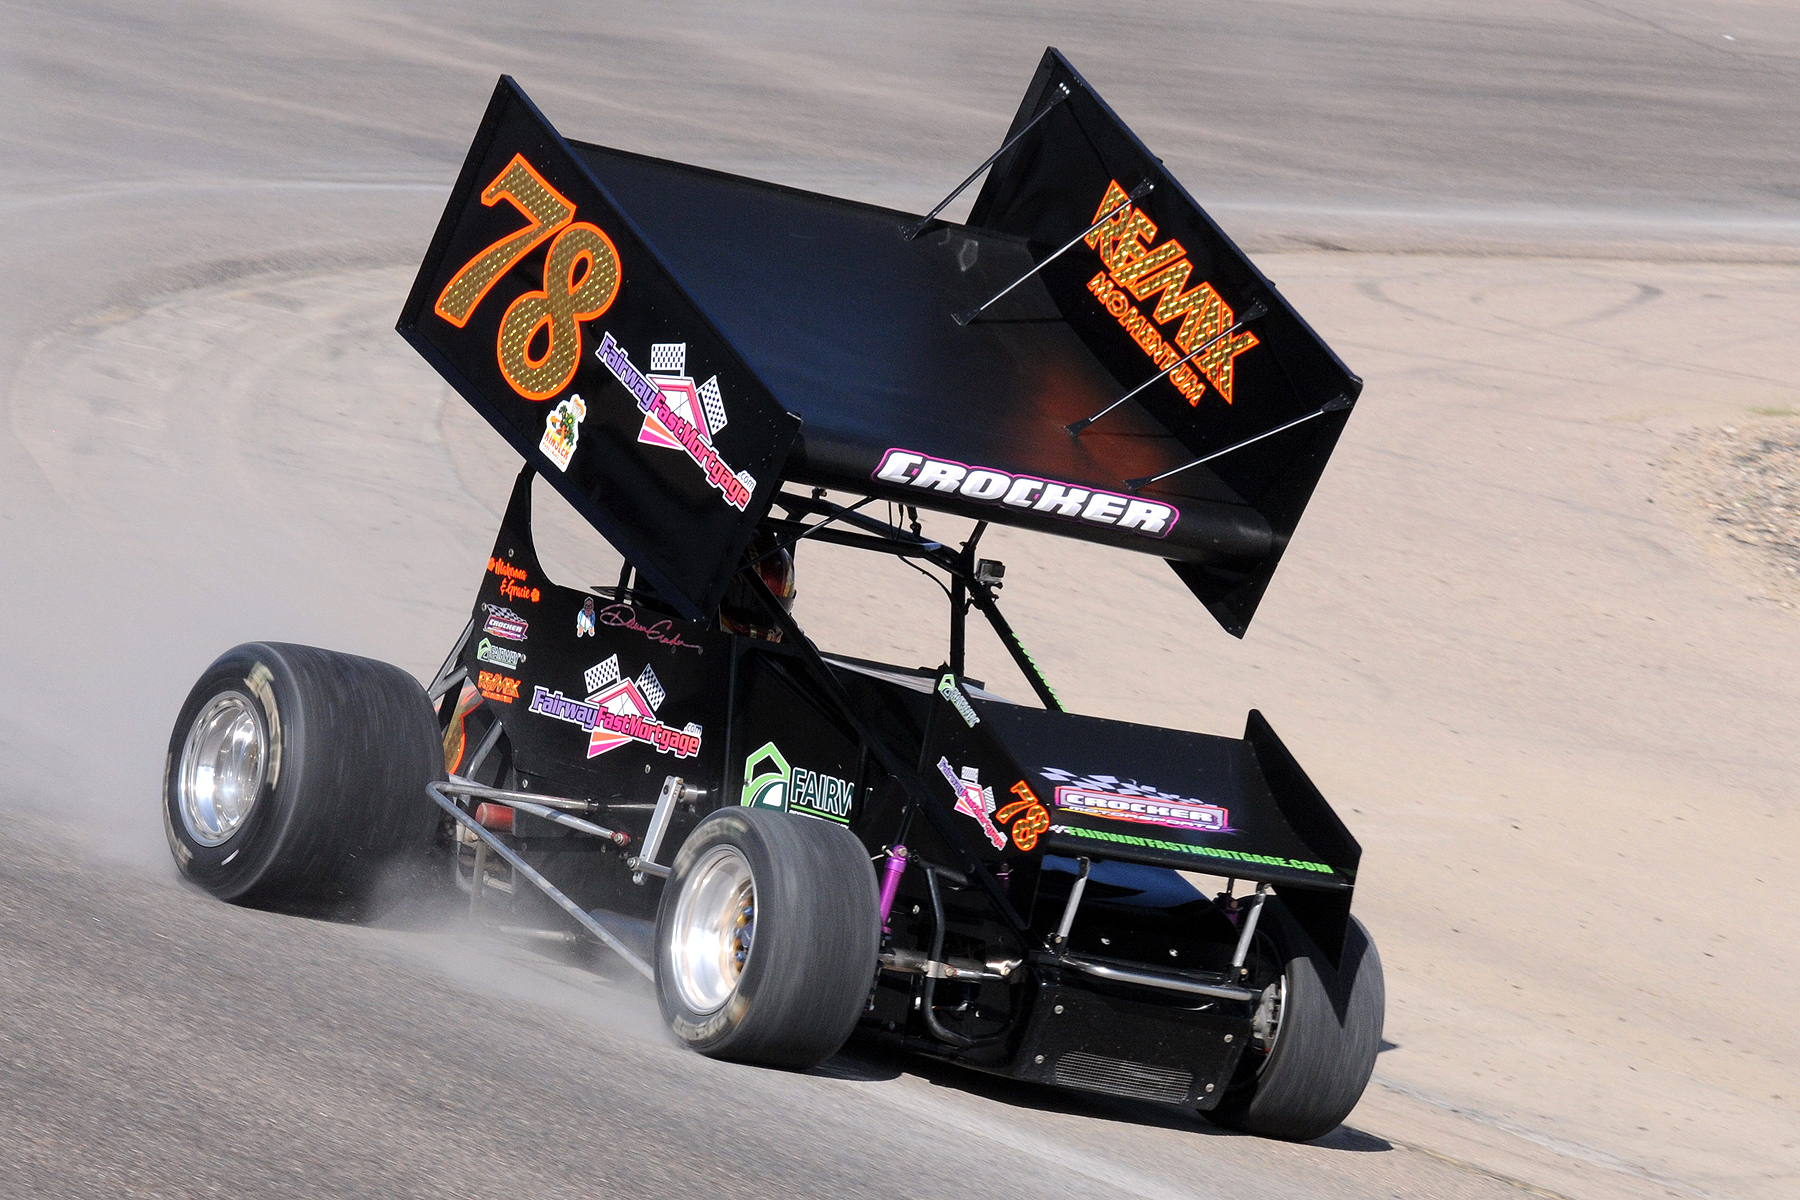 King of the Wing Sprint Cars Visit CNS for a 2-Day Show this Weekend - Big West Racing